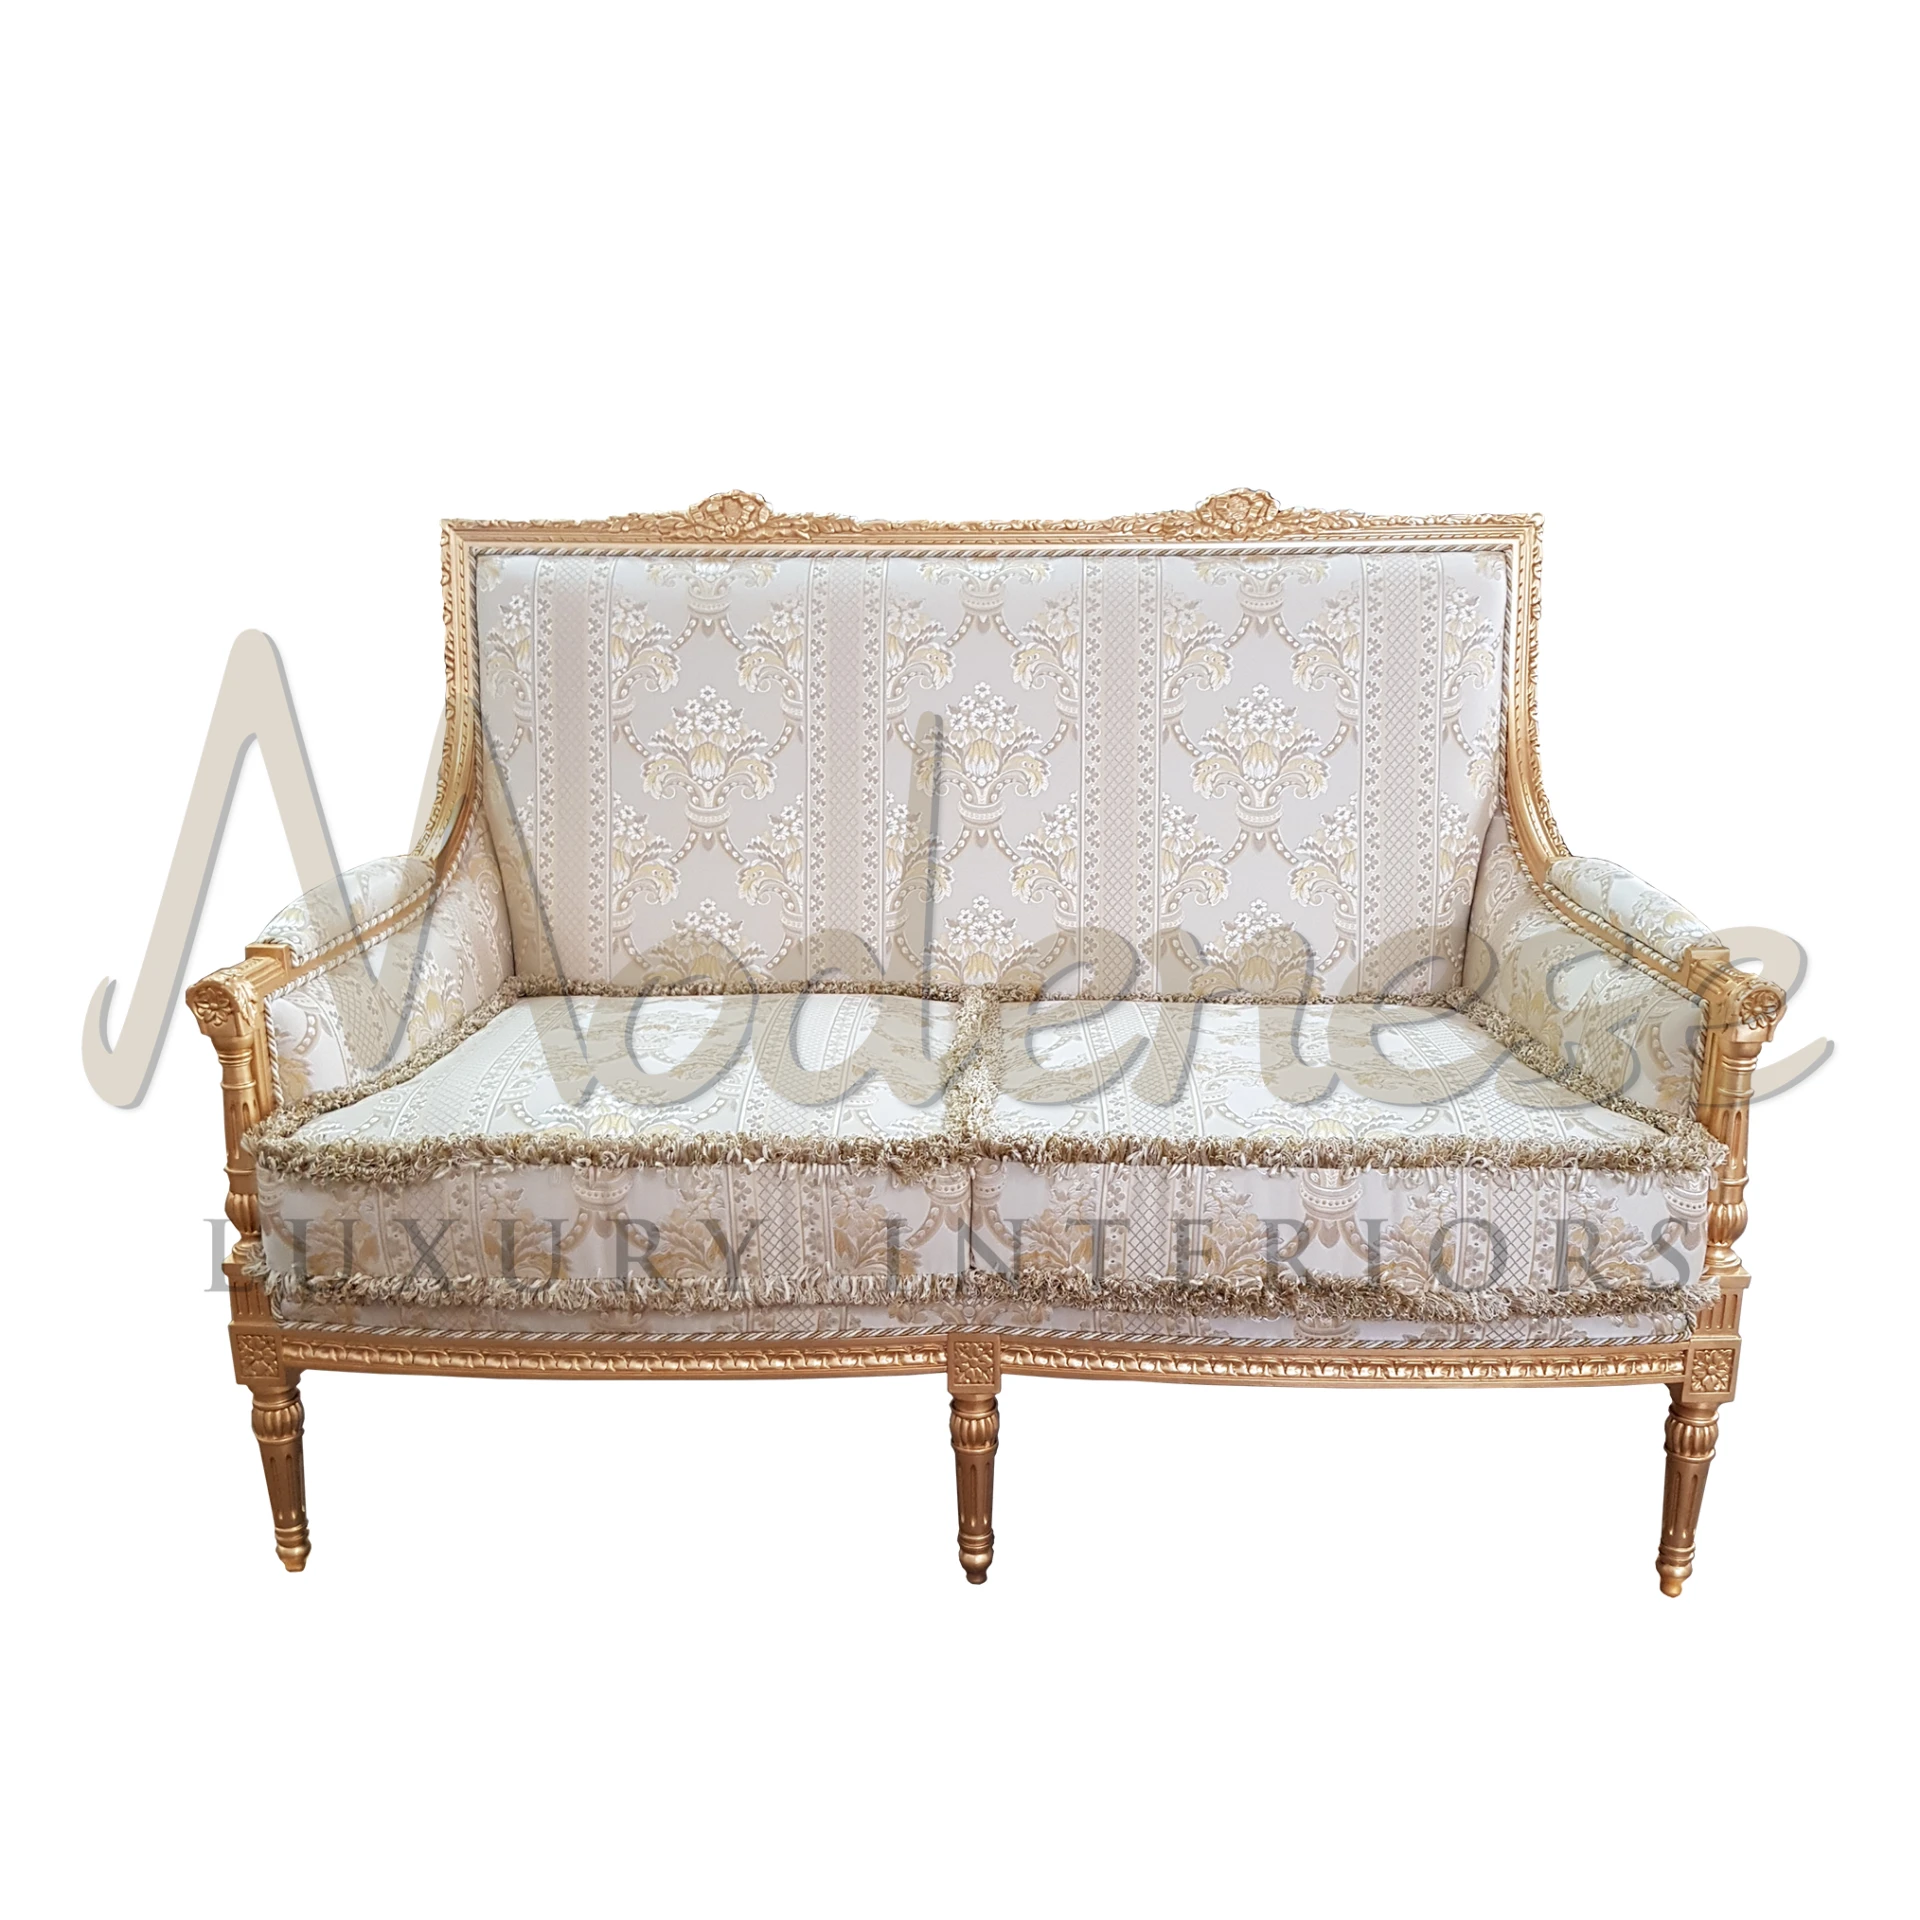 Victorian Loveseat by Modenese: Luxury interiors meet classic design, featuring Venetian style and gold leaf accents.